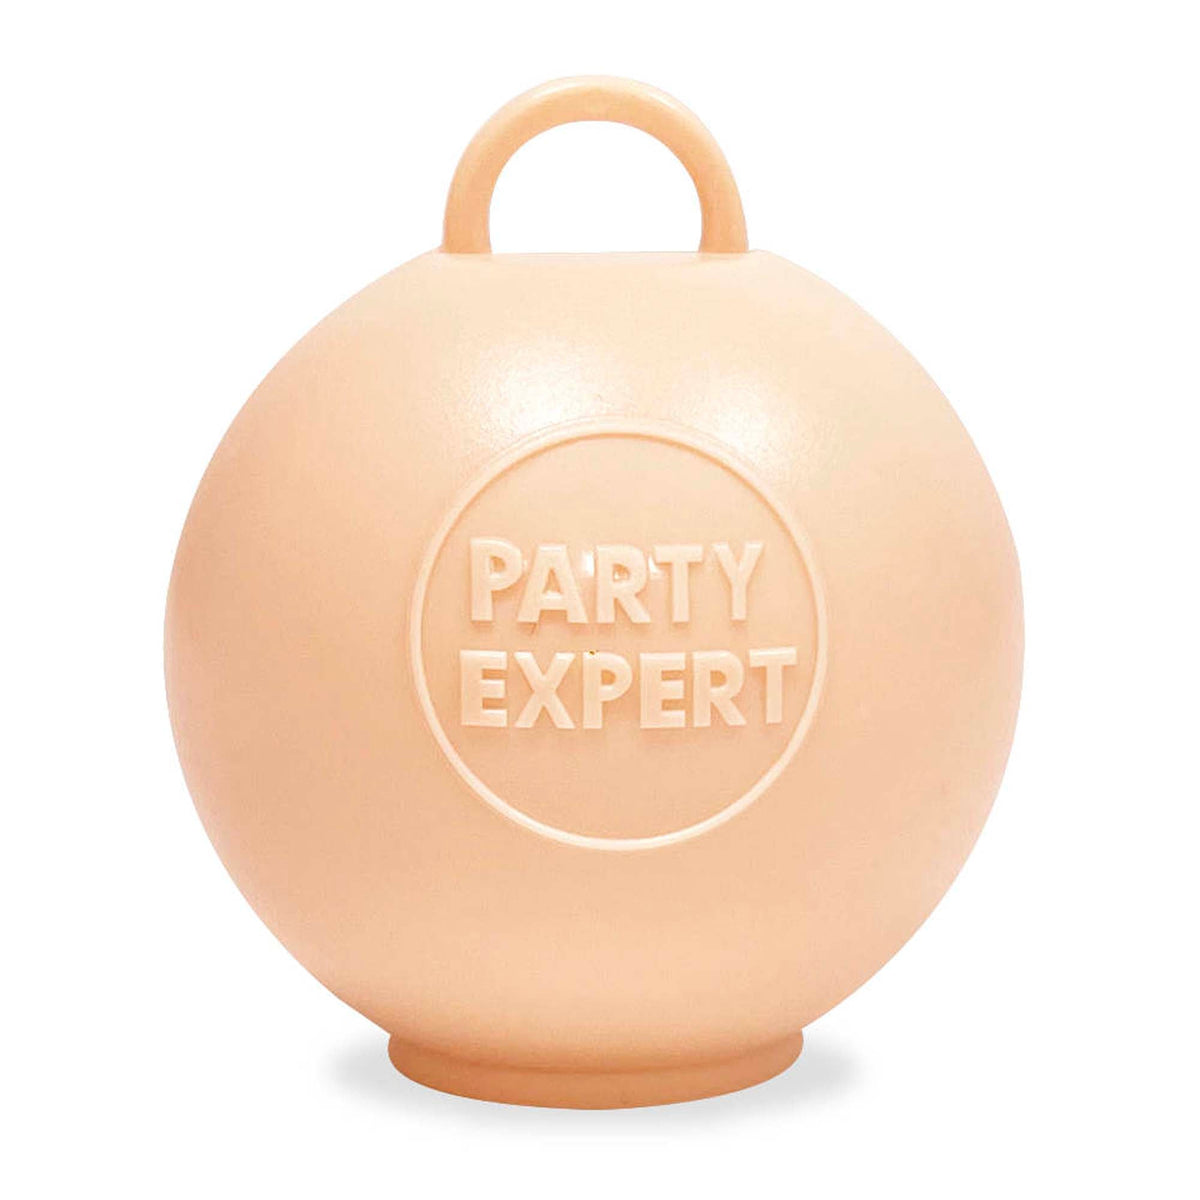 Dongguan Caipai Plastic Hardware Balloons Nude Beige Bubble Balloon Weight, 1 Count 810077659595